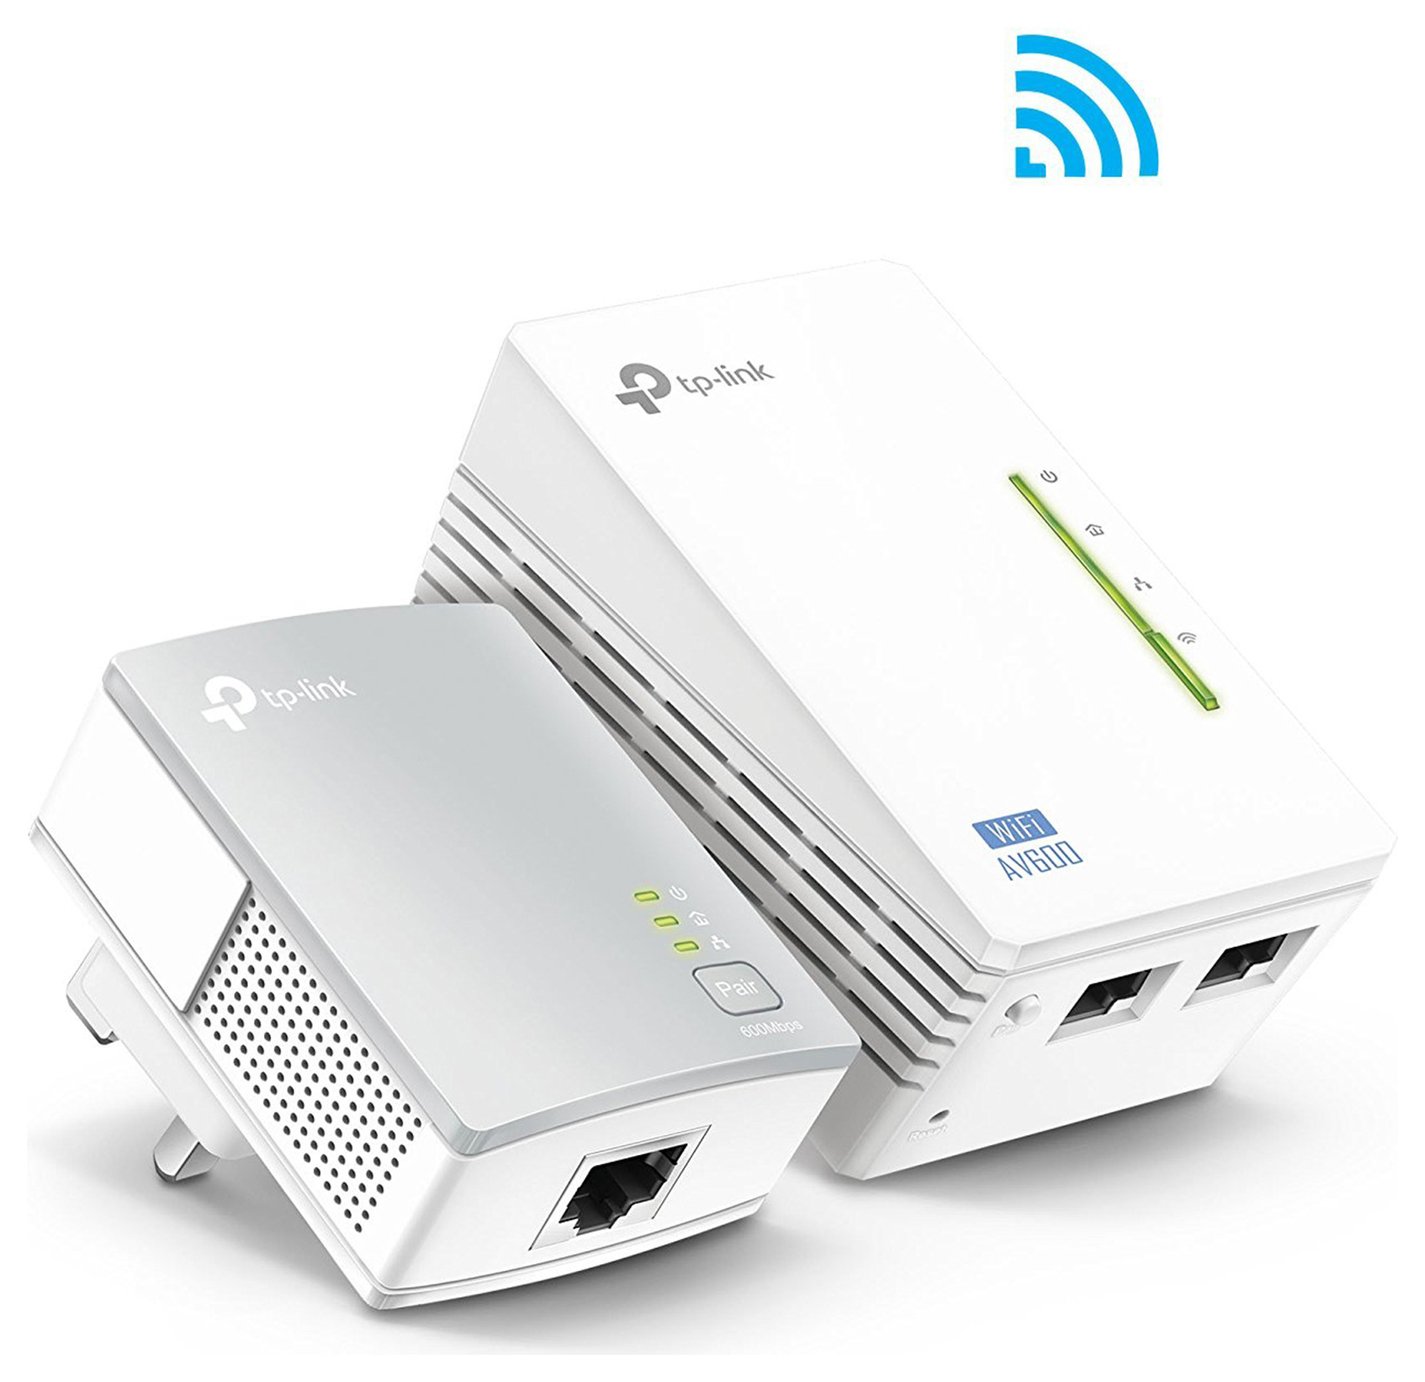 TP-LINK 300M Wi-Fi Extender Booster & 600MBPS Powerline Kit Review